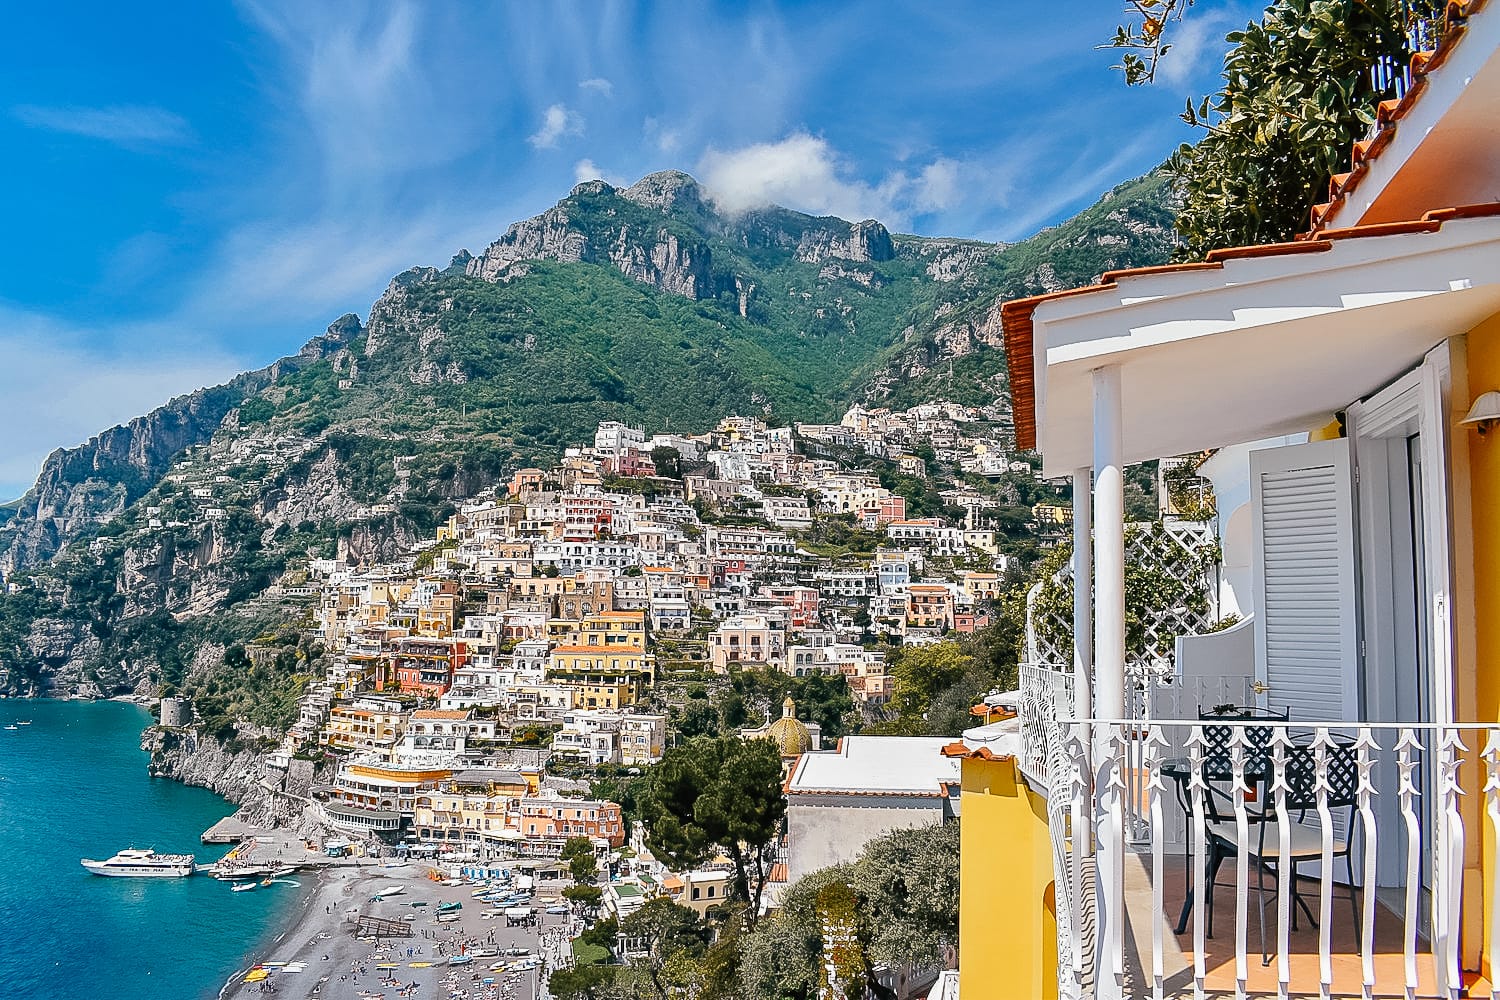 Positano, Italy, Is Beautiful but Expensive and Overrun With Tourists